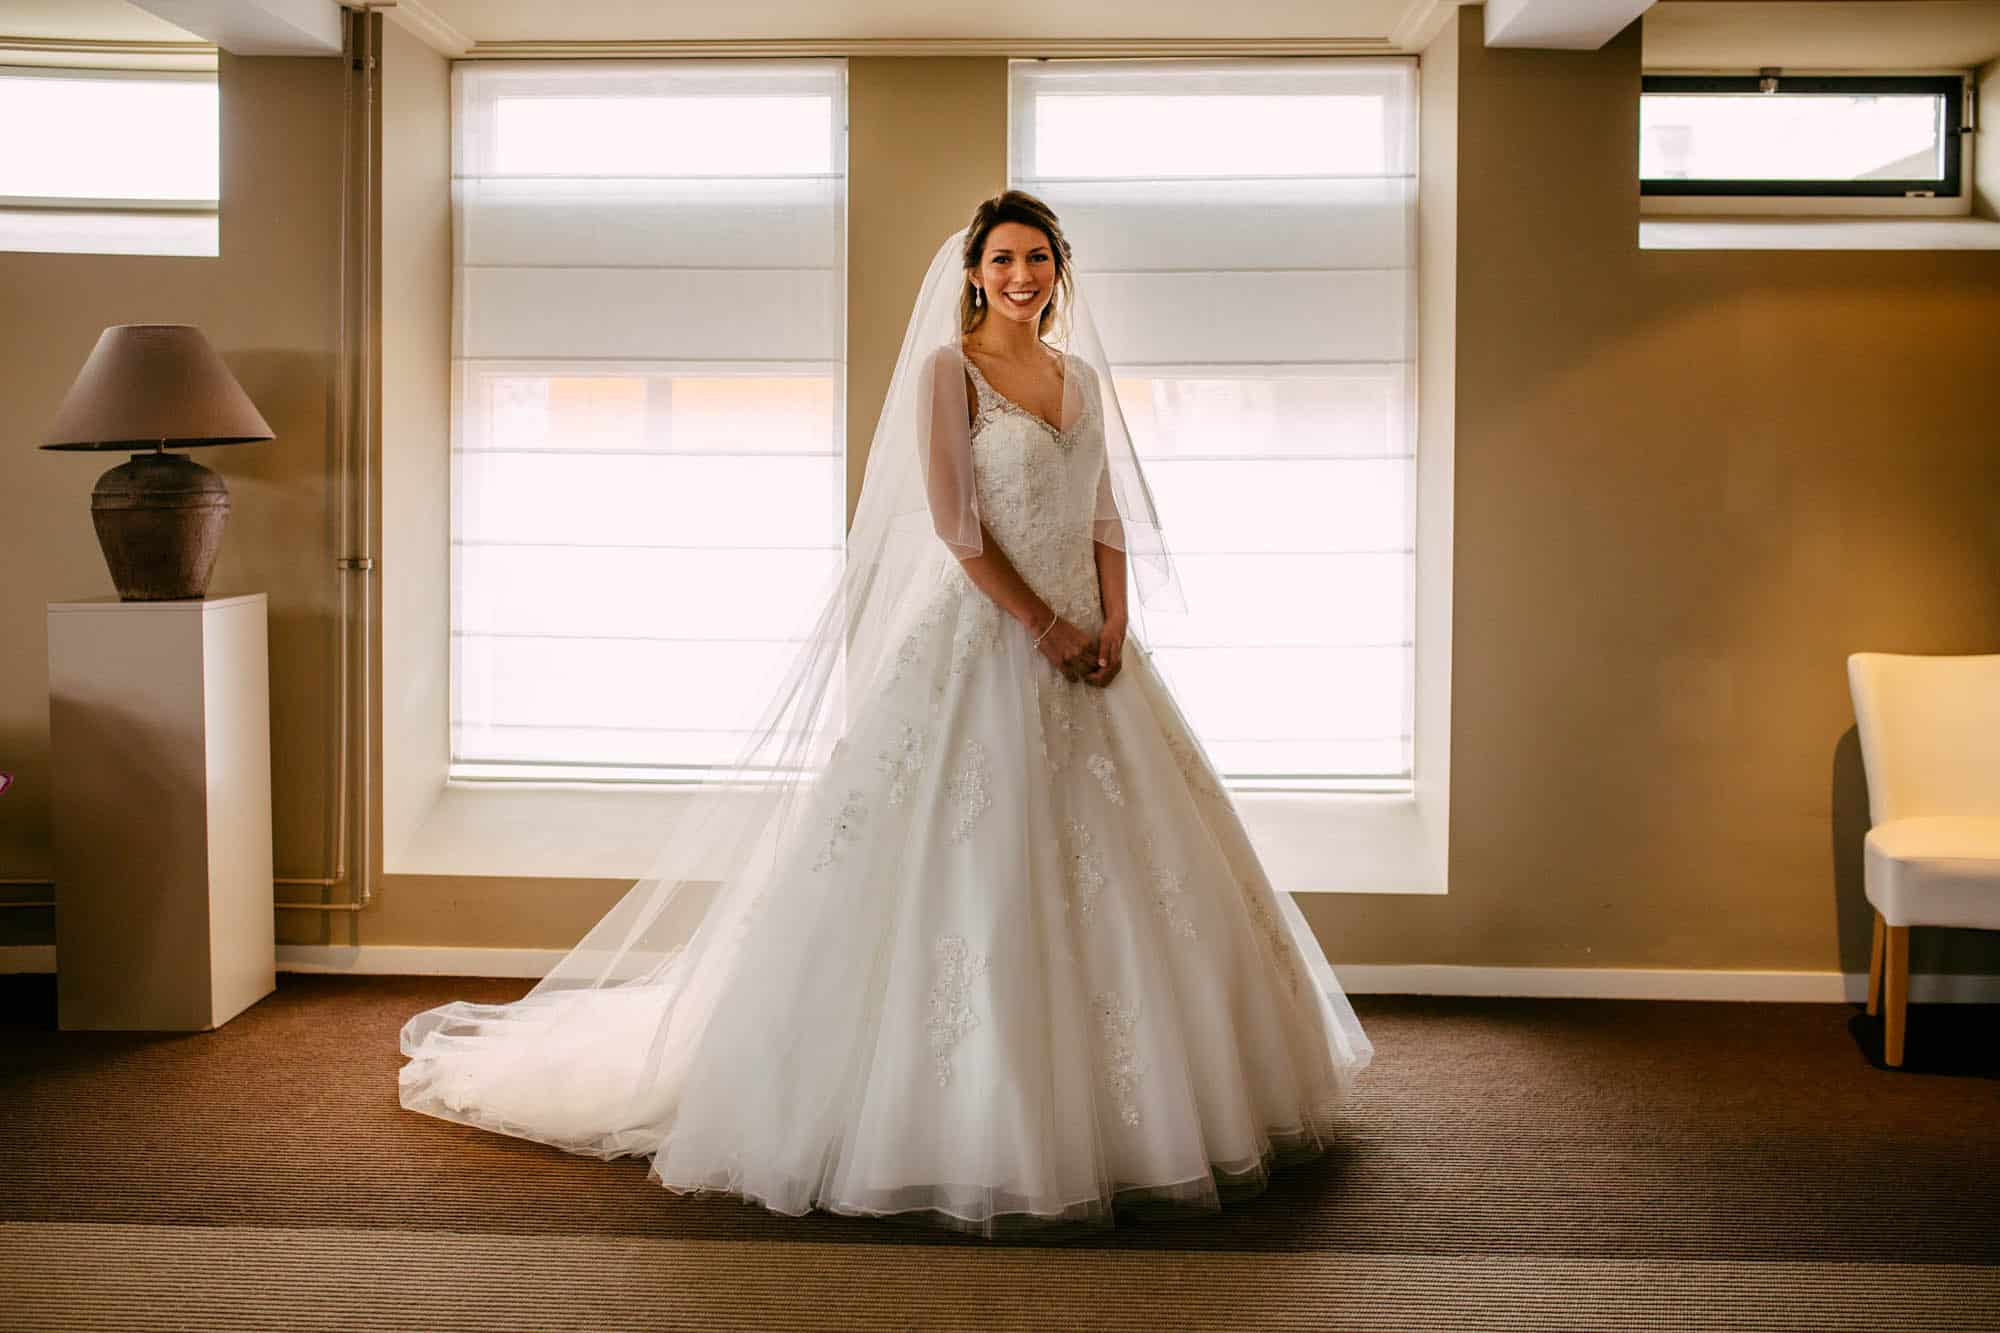 Description : A bride in a wedding dress stands in a room.